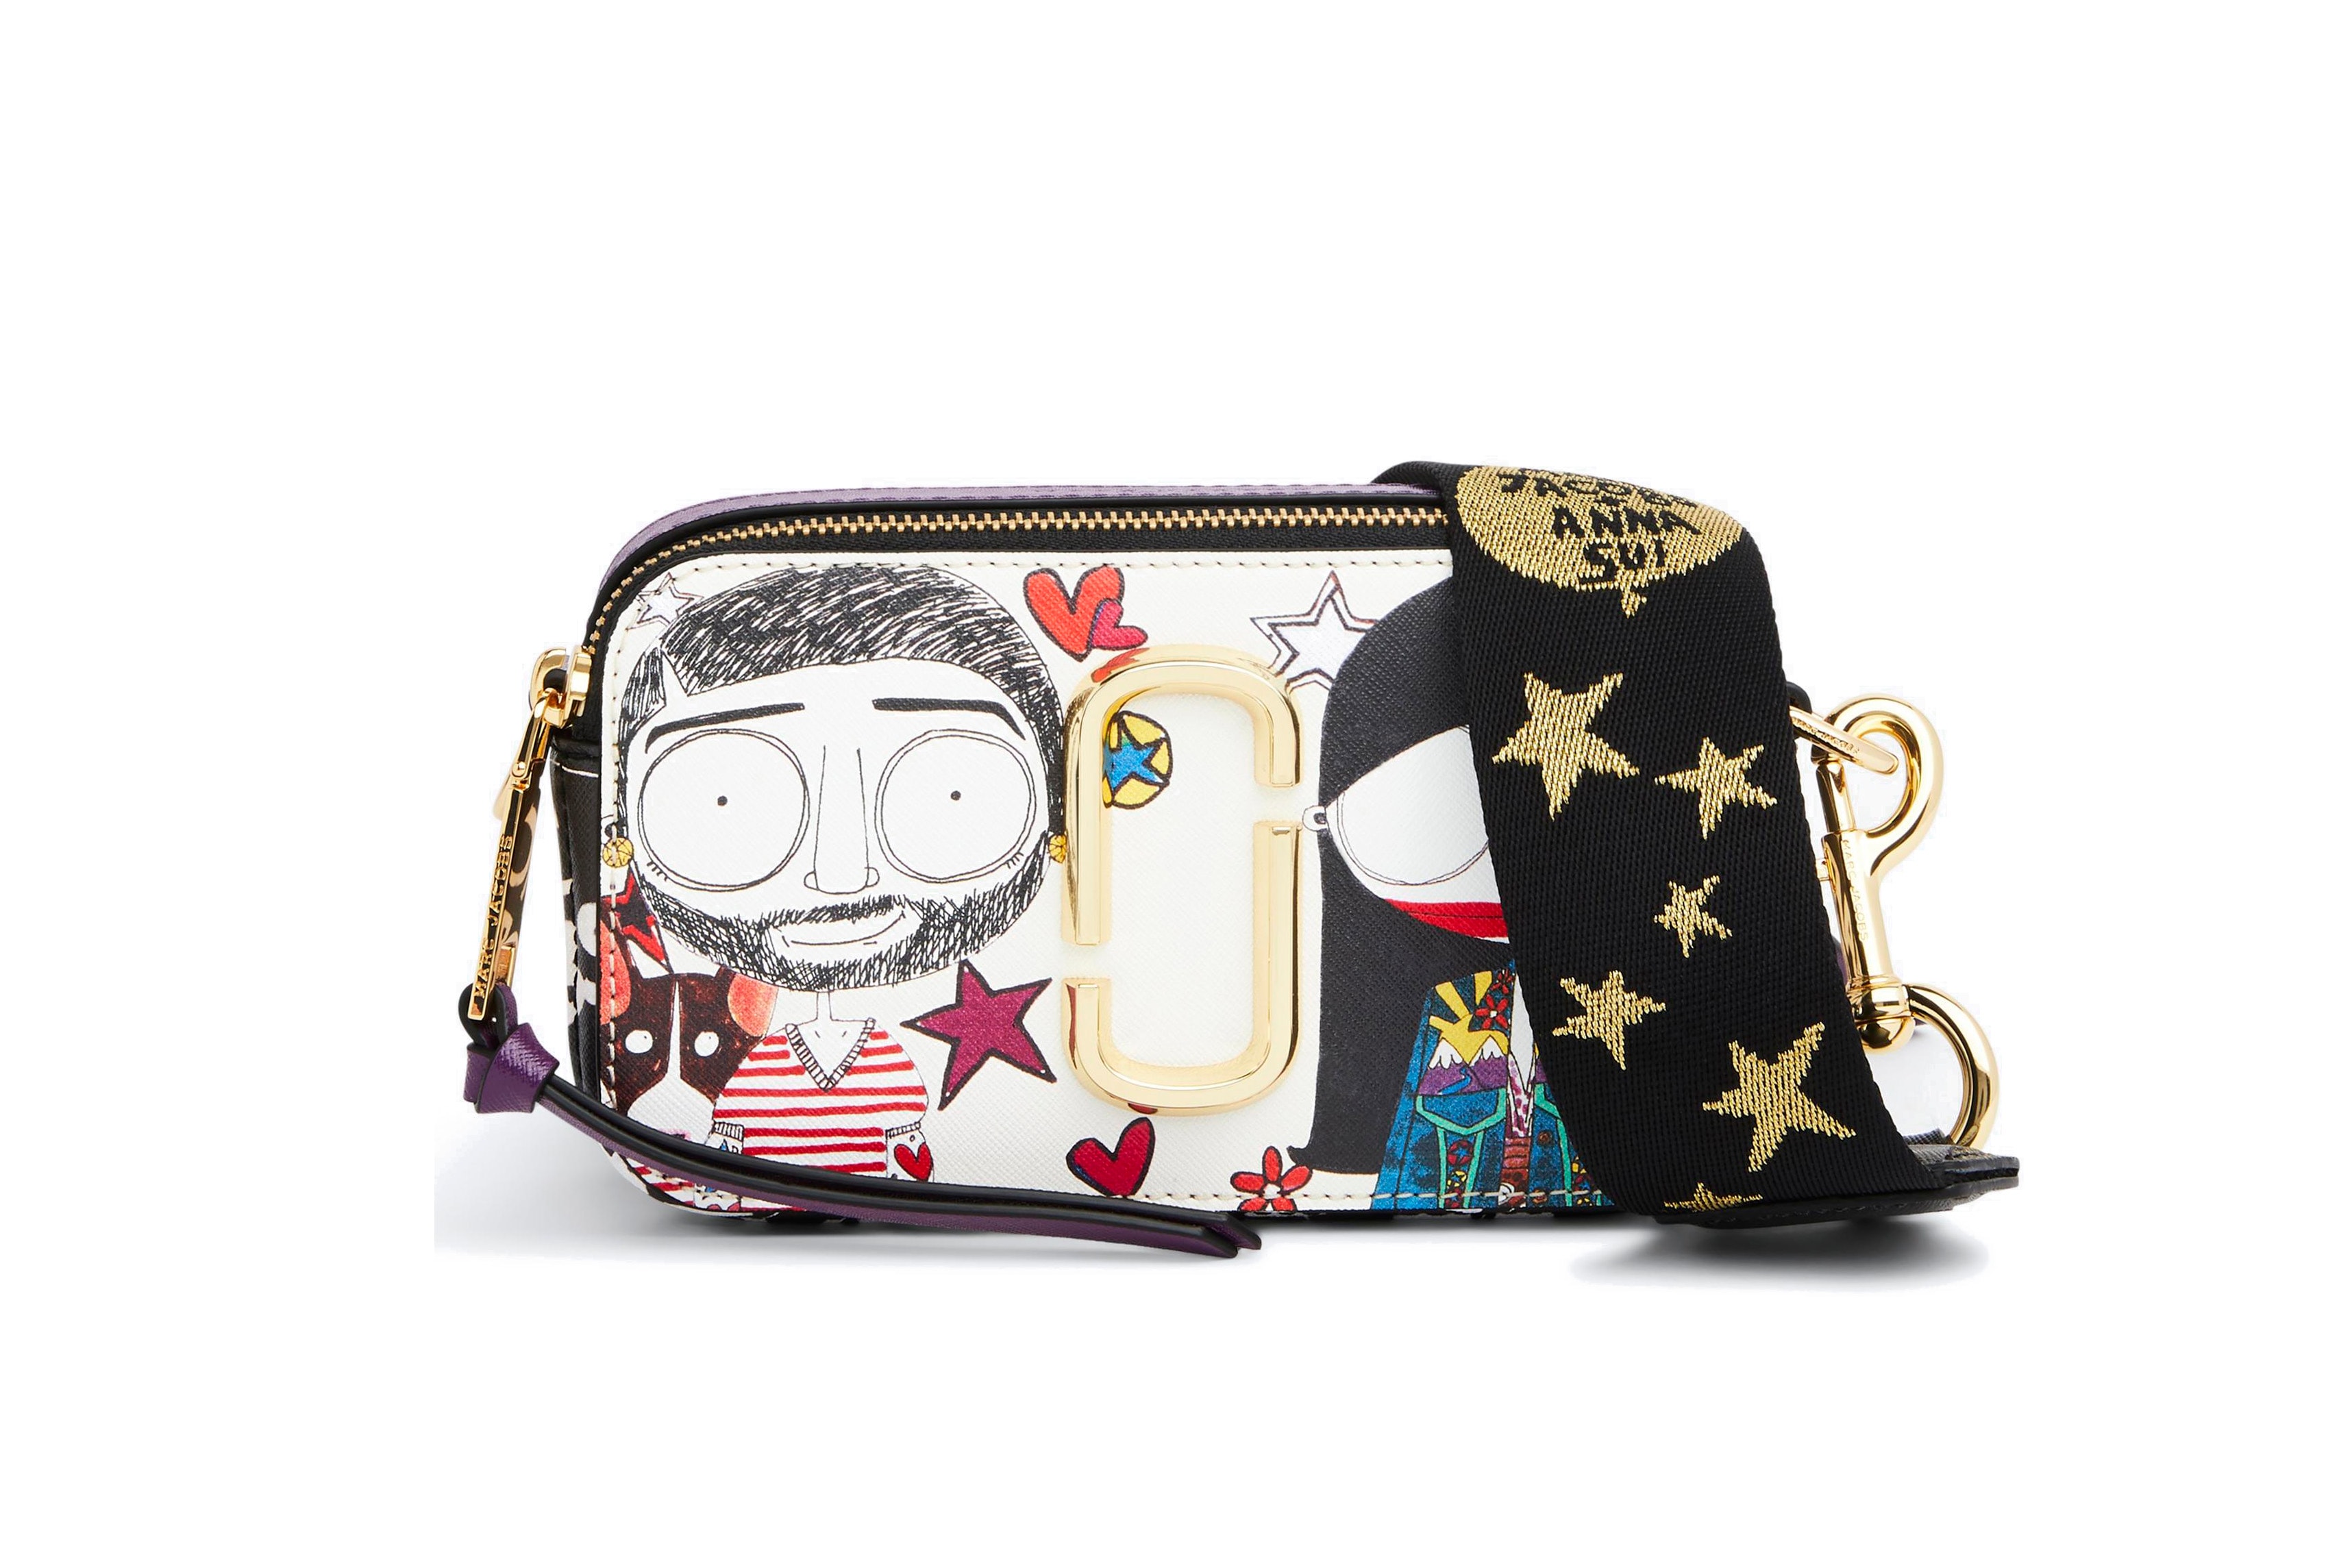 Marc Jacobs Anna Sui Capsule Collection Limited Edition Bags Keychain Apparel Tshirt Print Will Broome